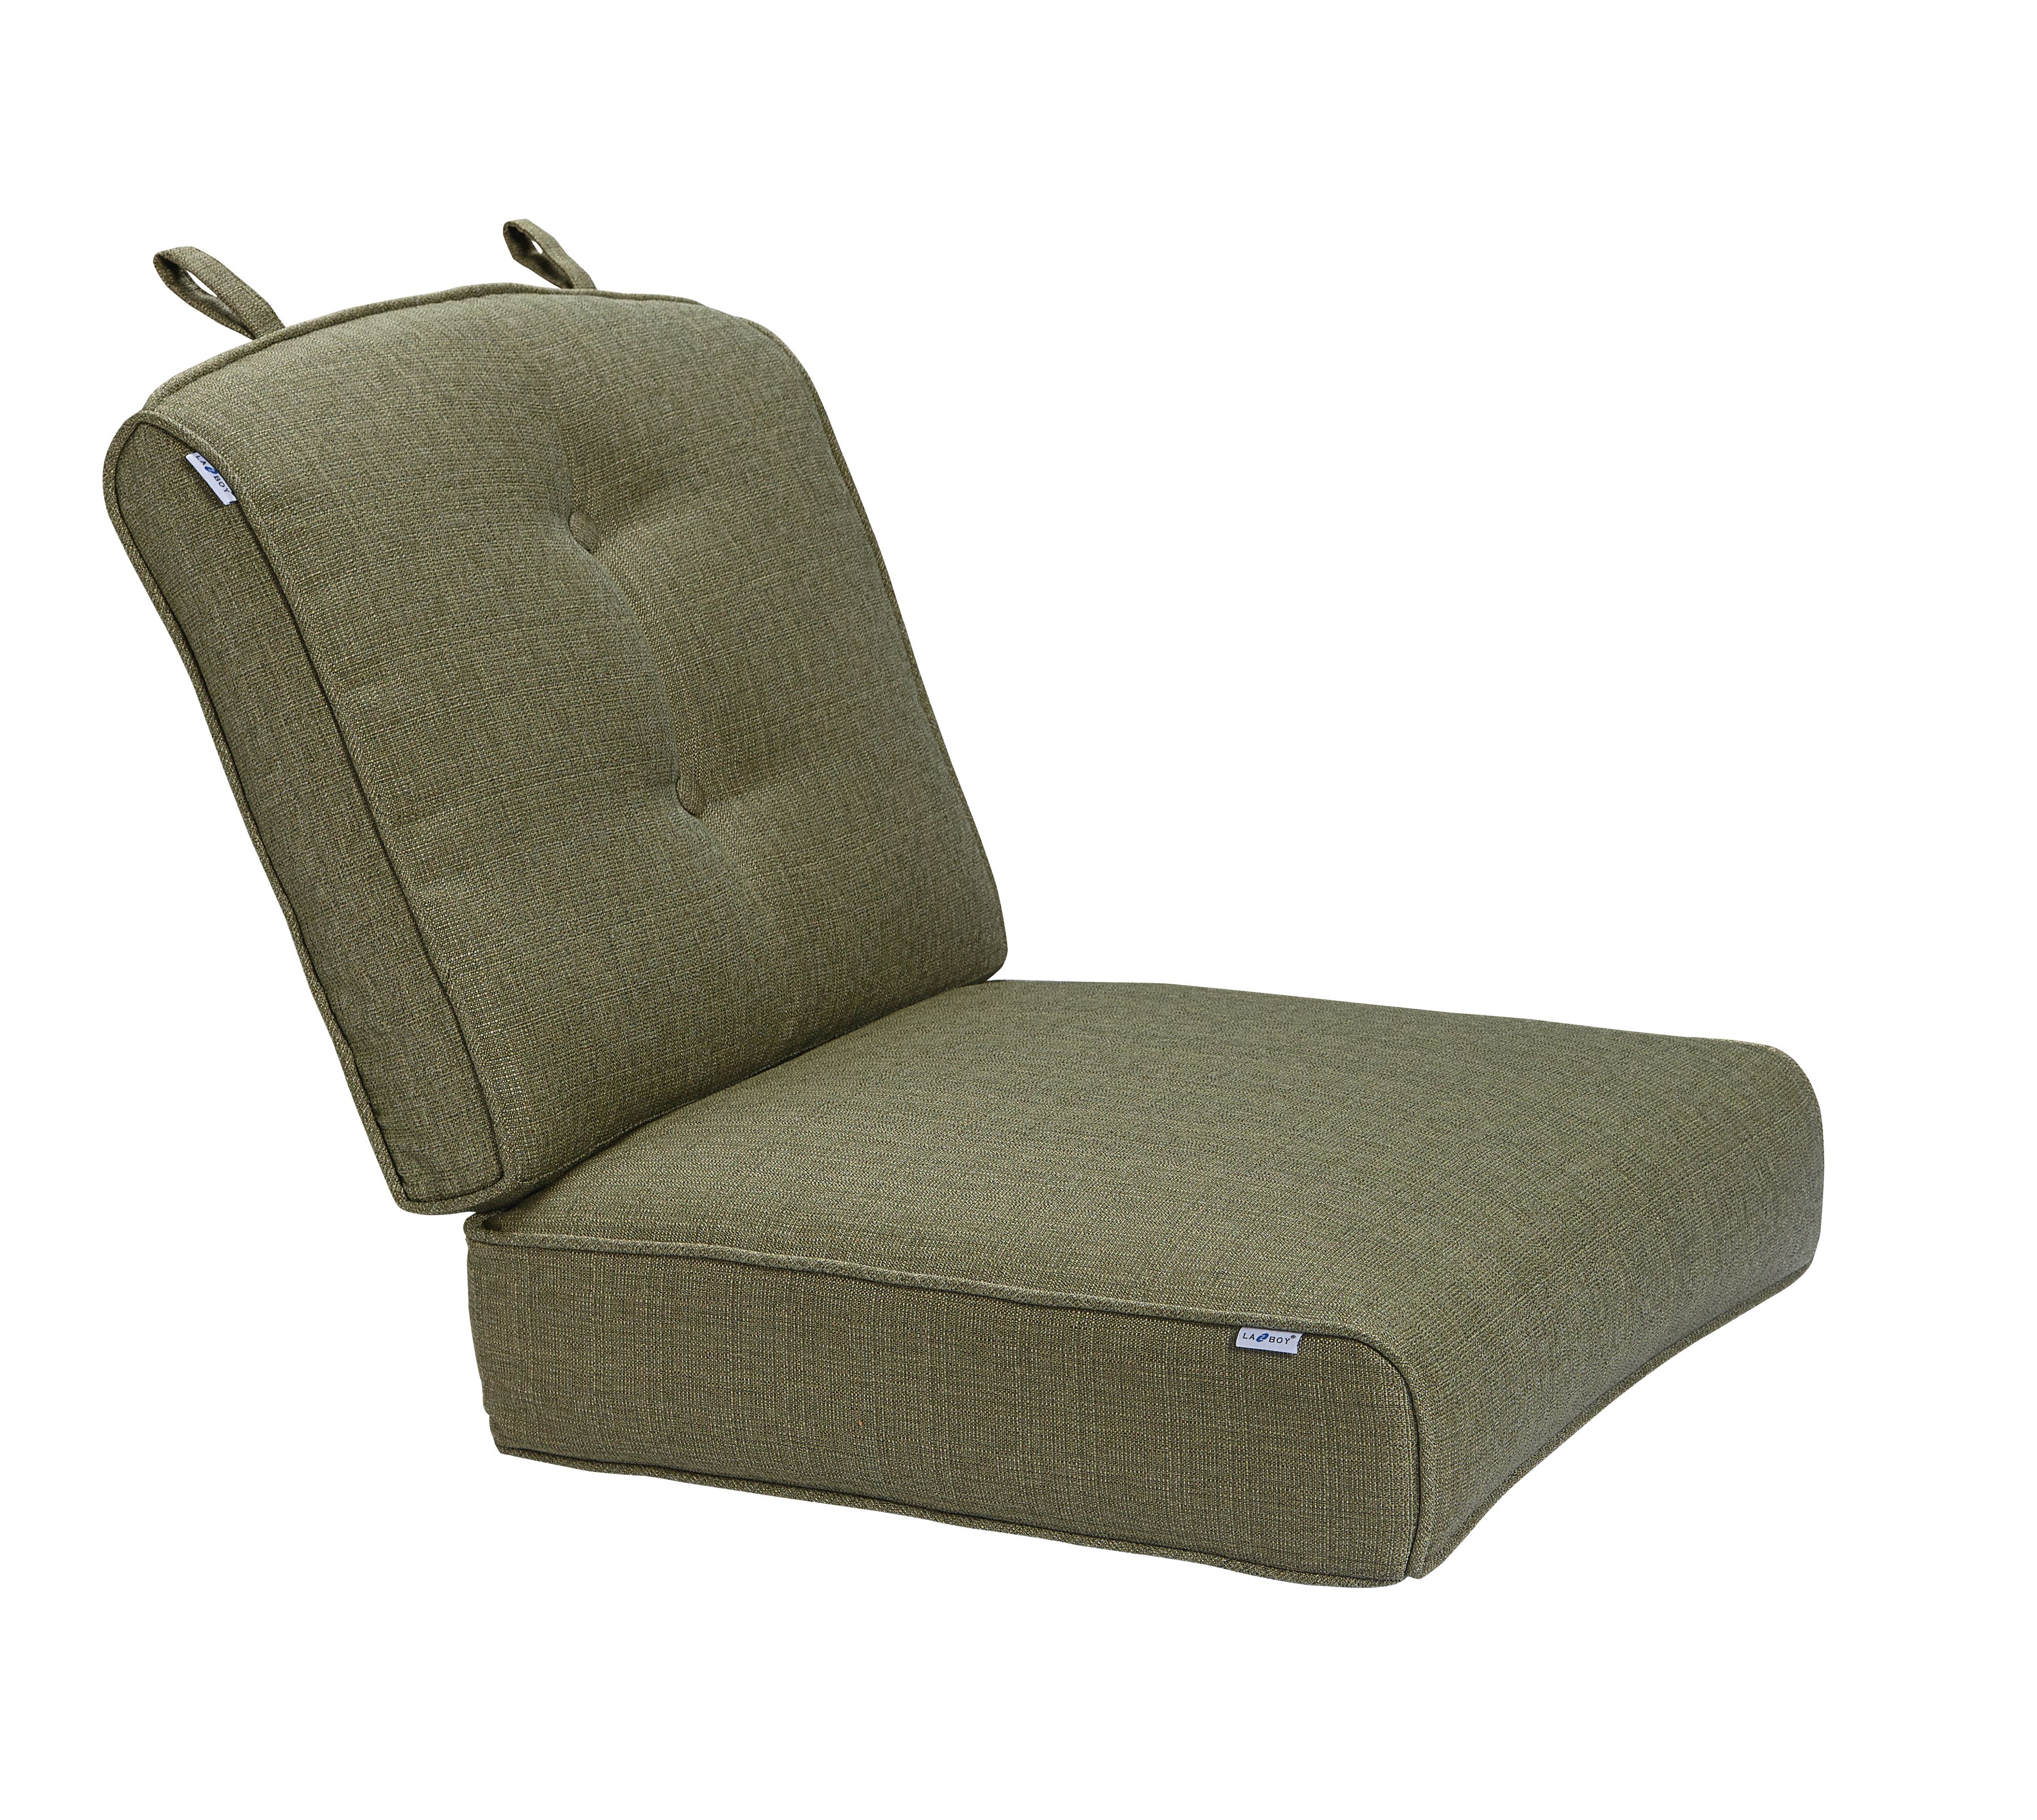 La-Z-Boy Peyton Replacement Seating Cushion - Limited Availability